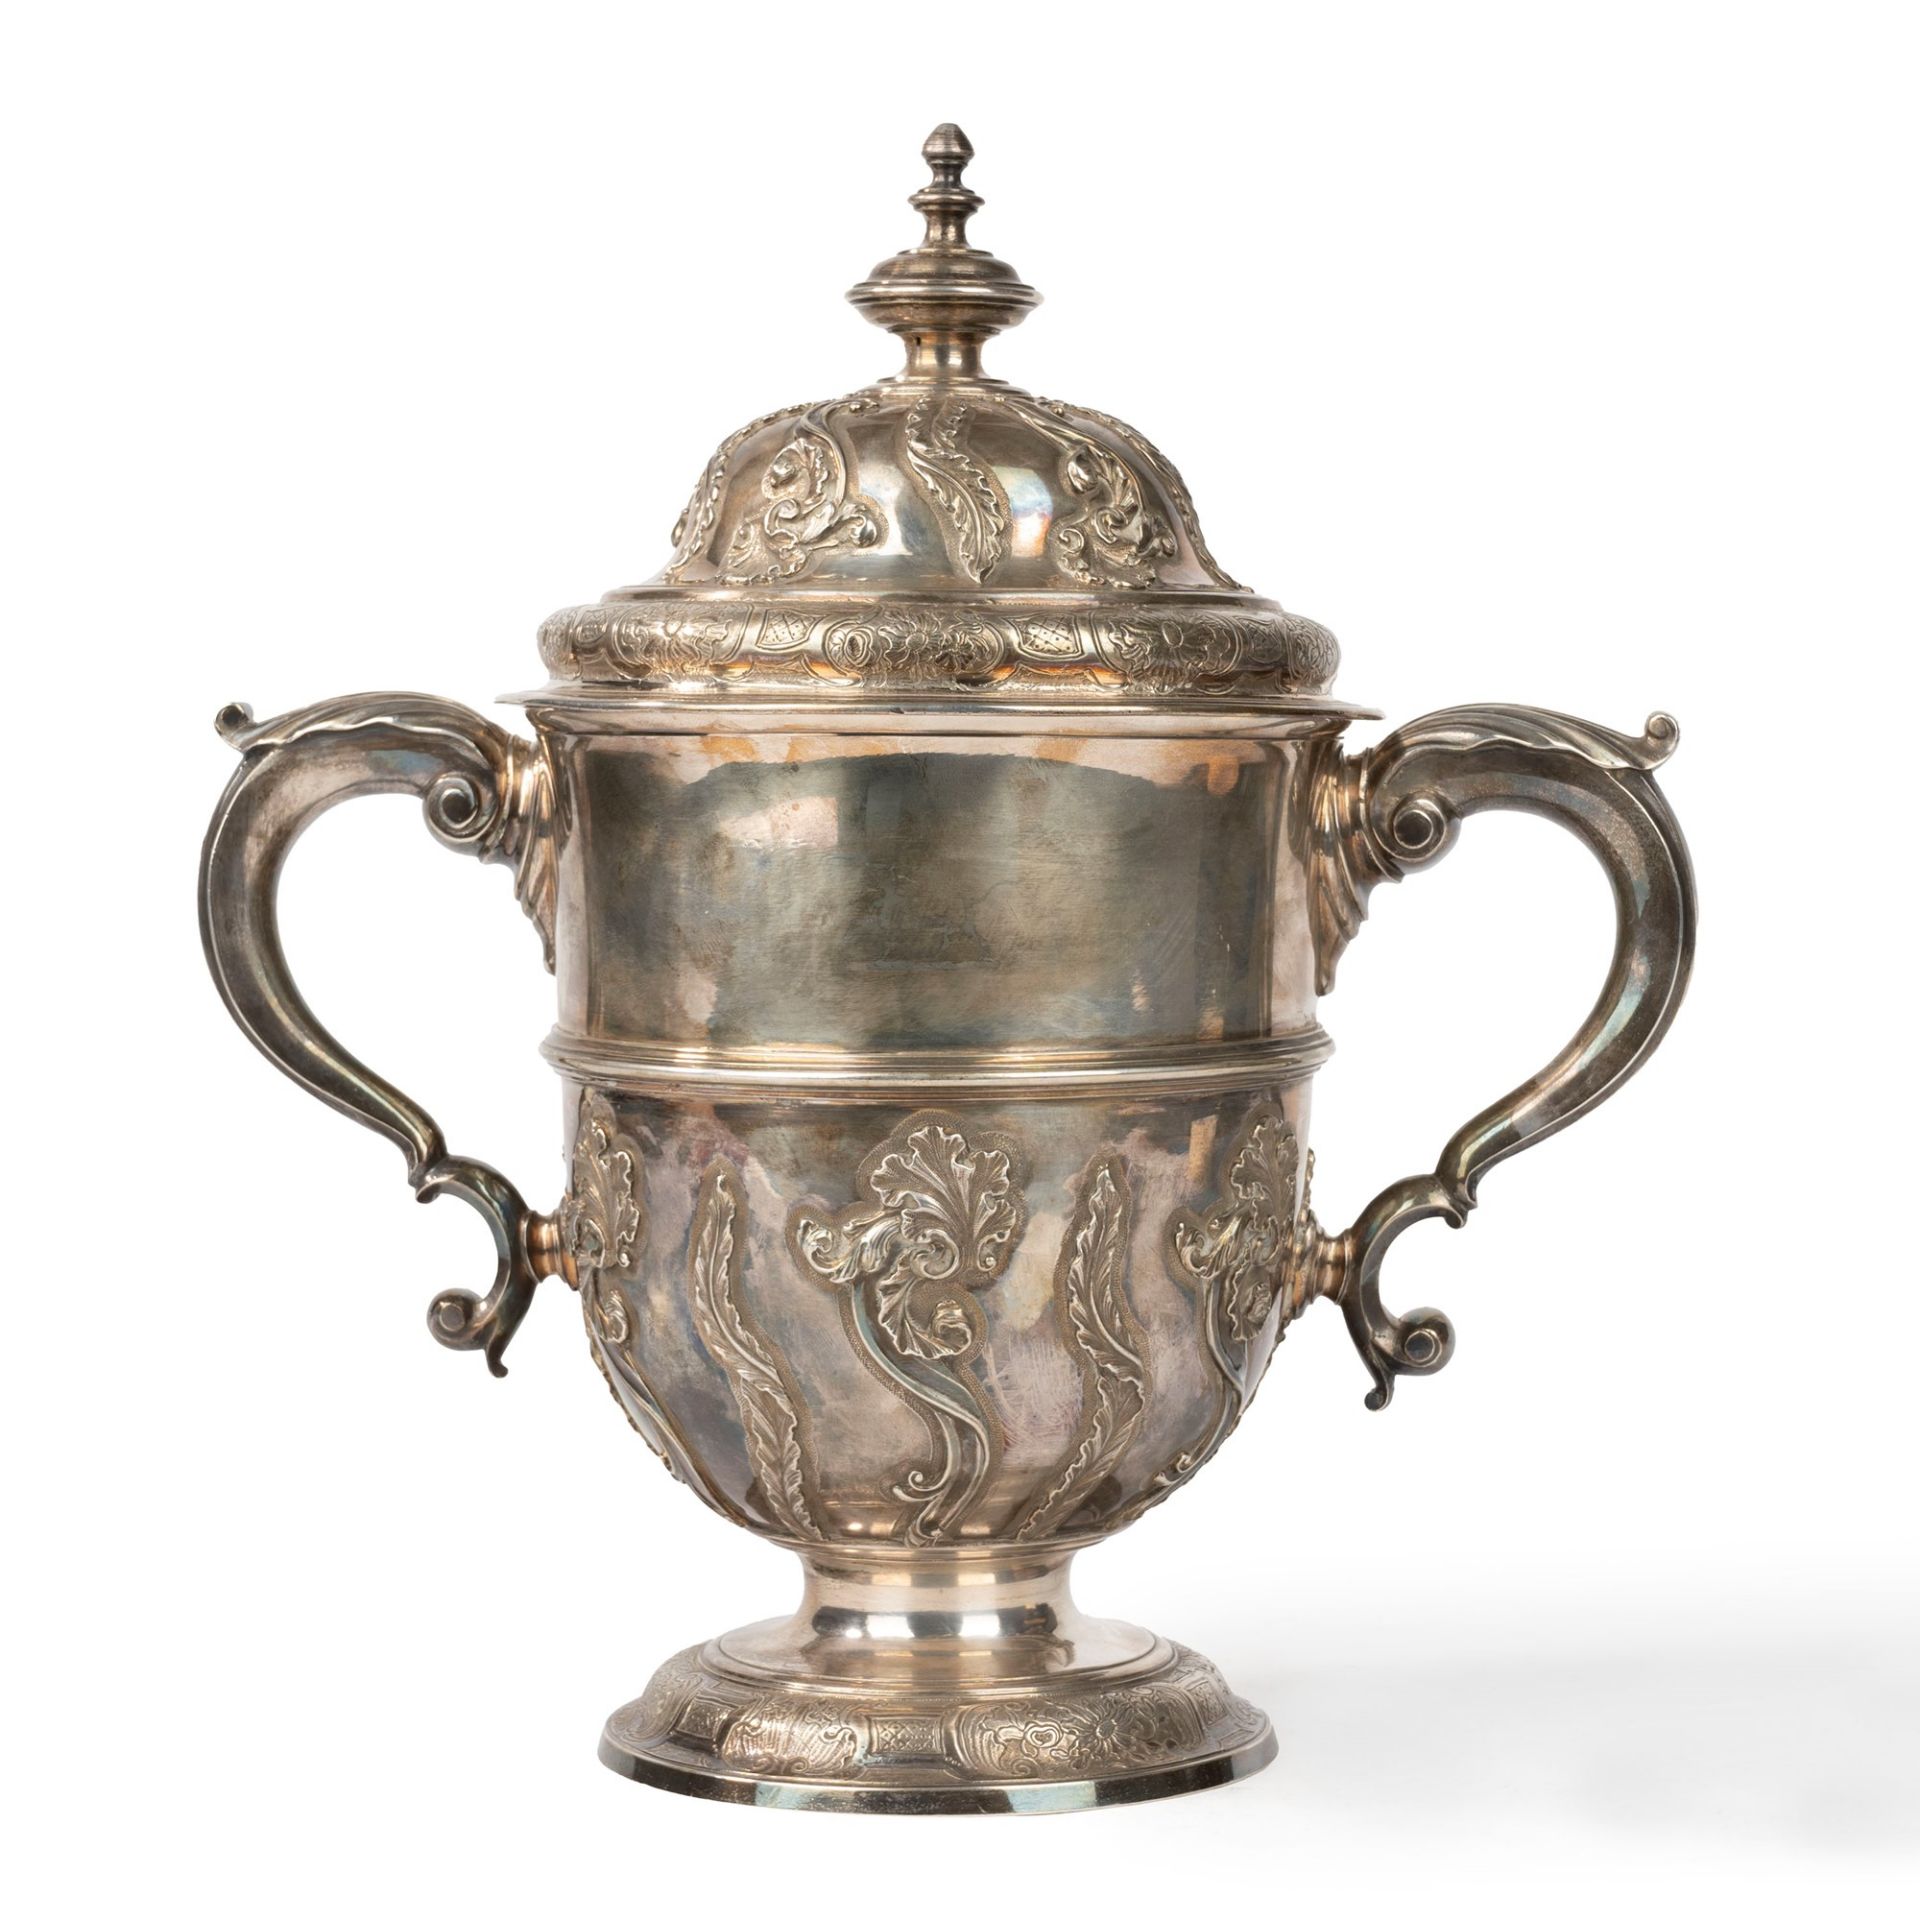 Silver cup, London, England 1737